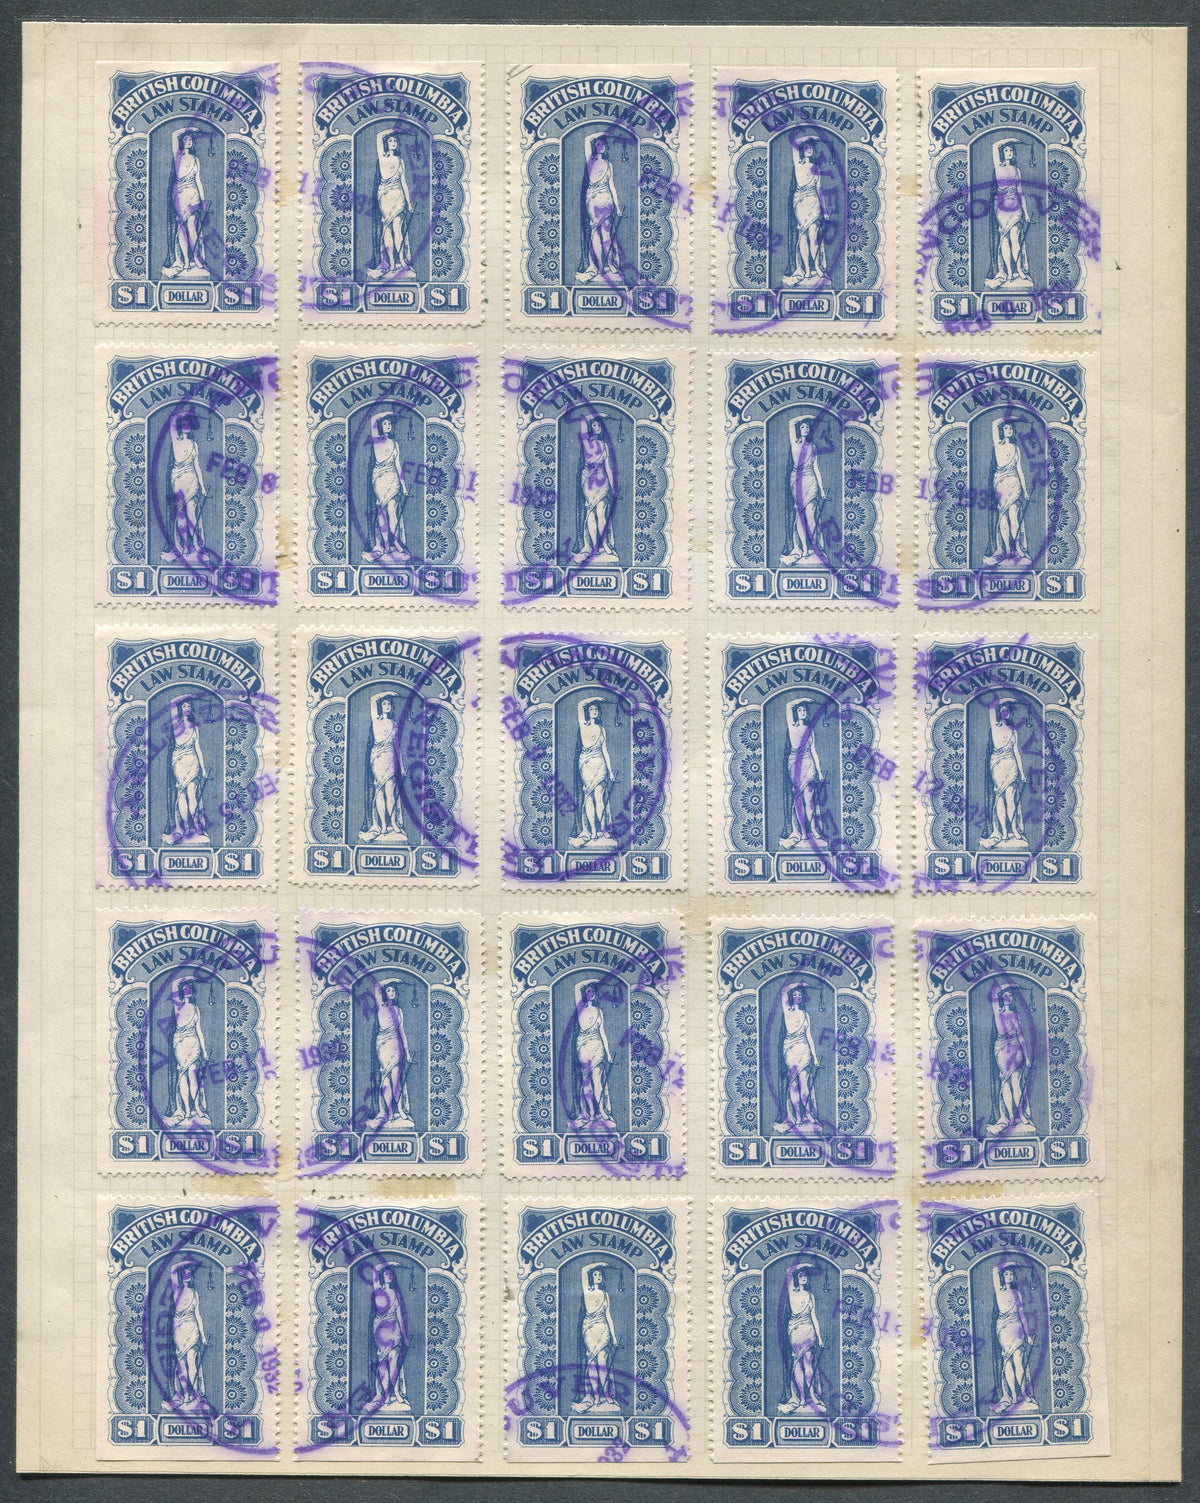 0031BC2010 - BCL31 - Used Reconstructed Sheet